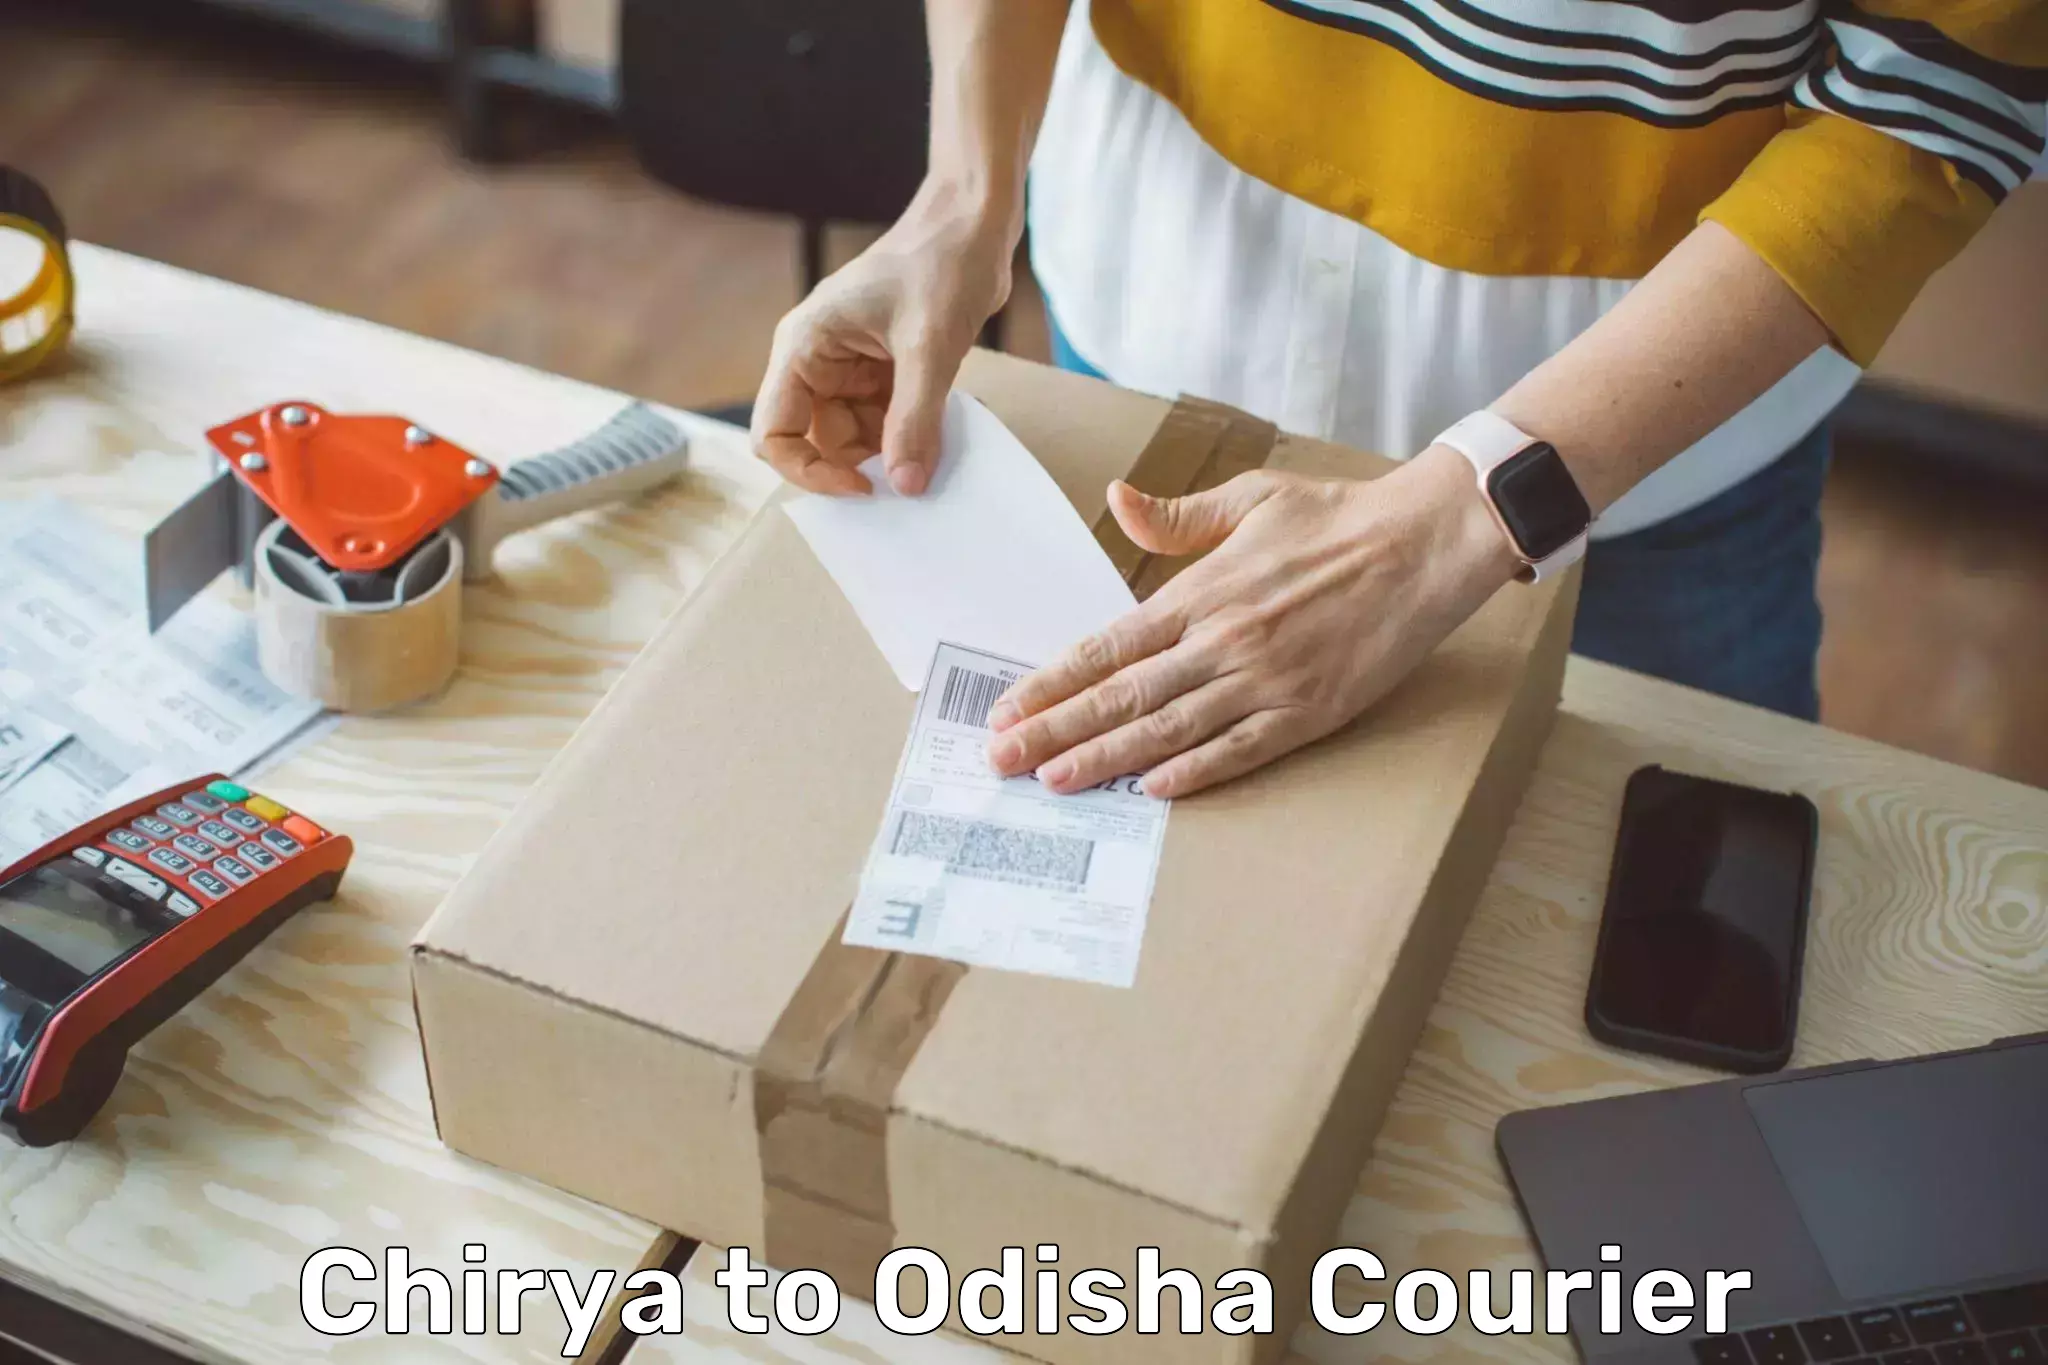 Flexible delivery scheduling Chirya to Cuttack